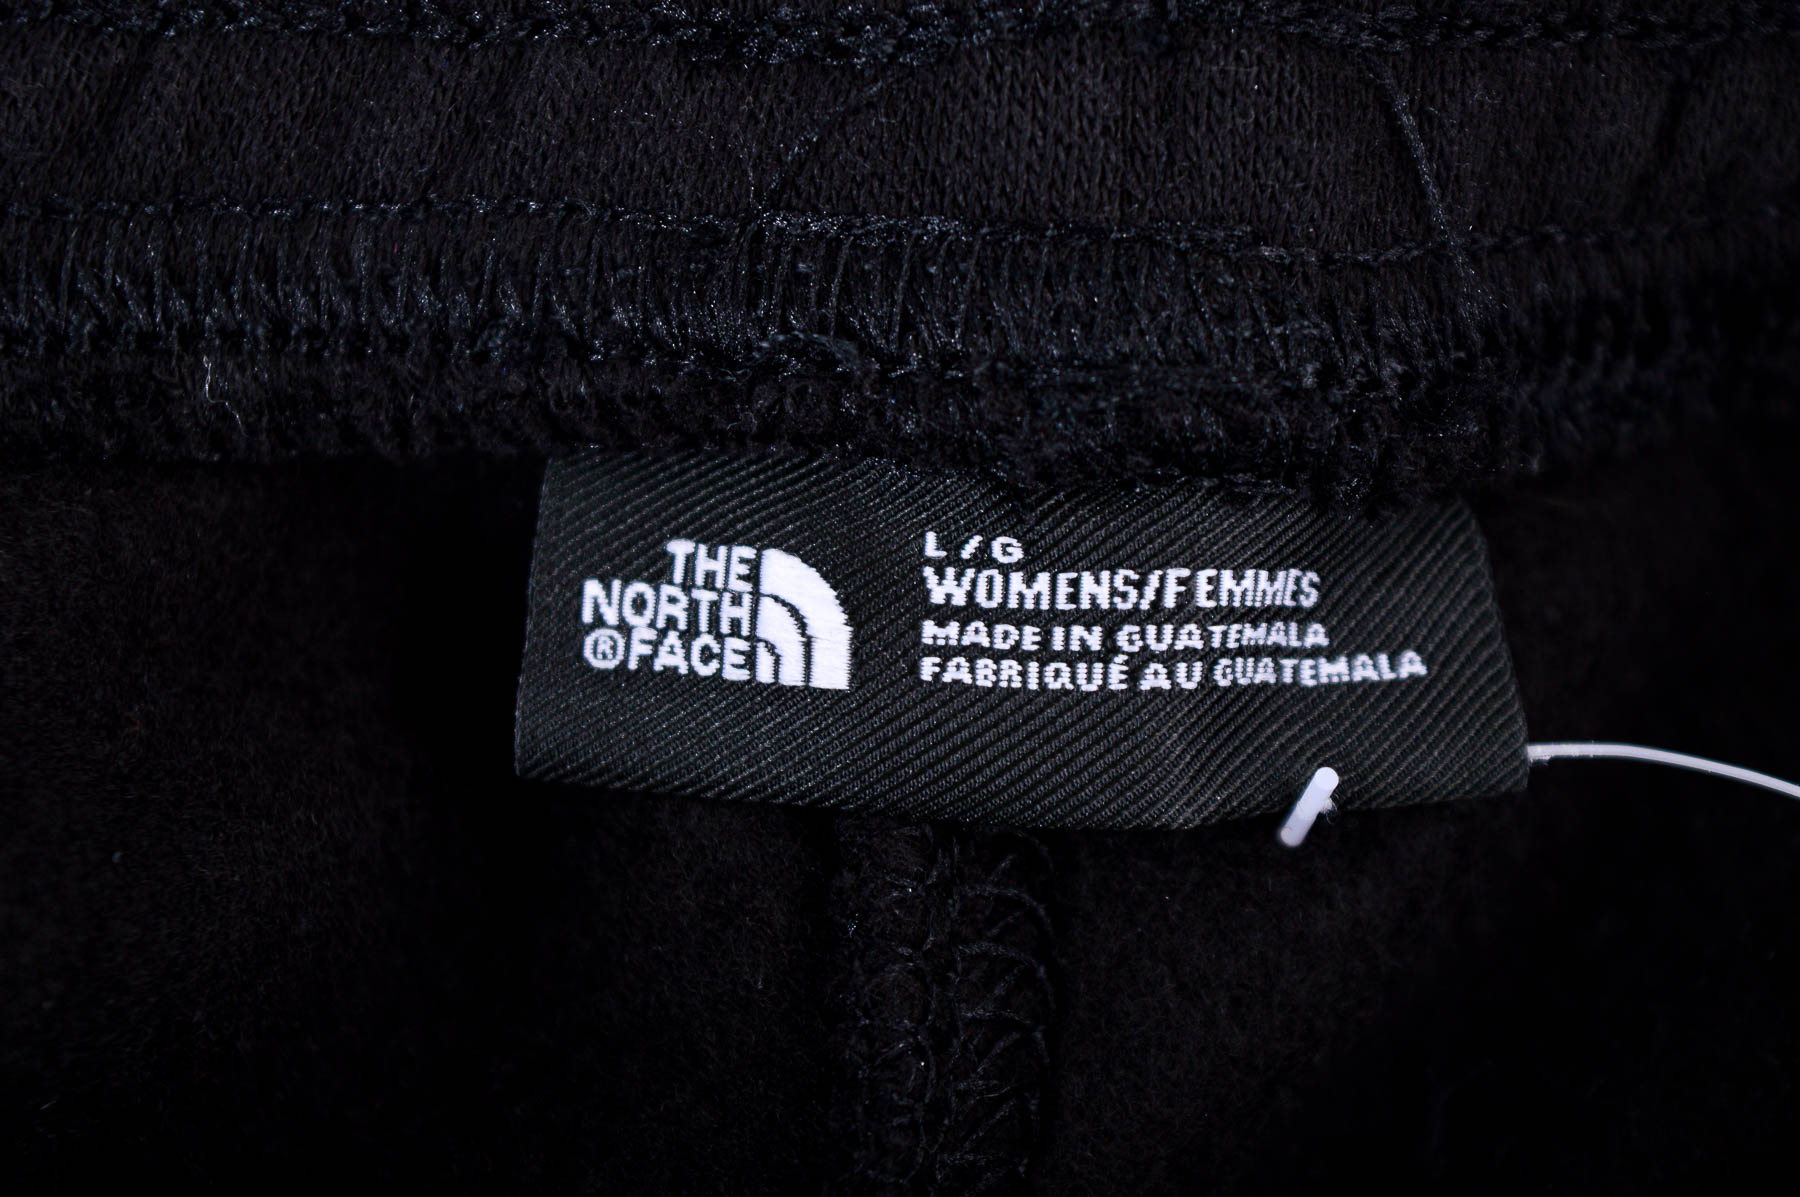 Female sports wear - The North Face - 2